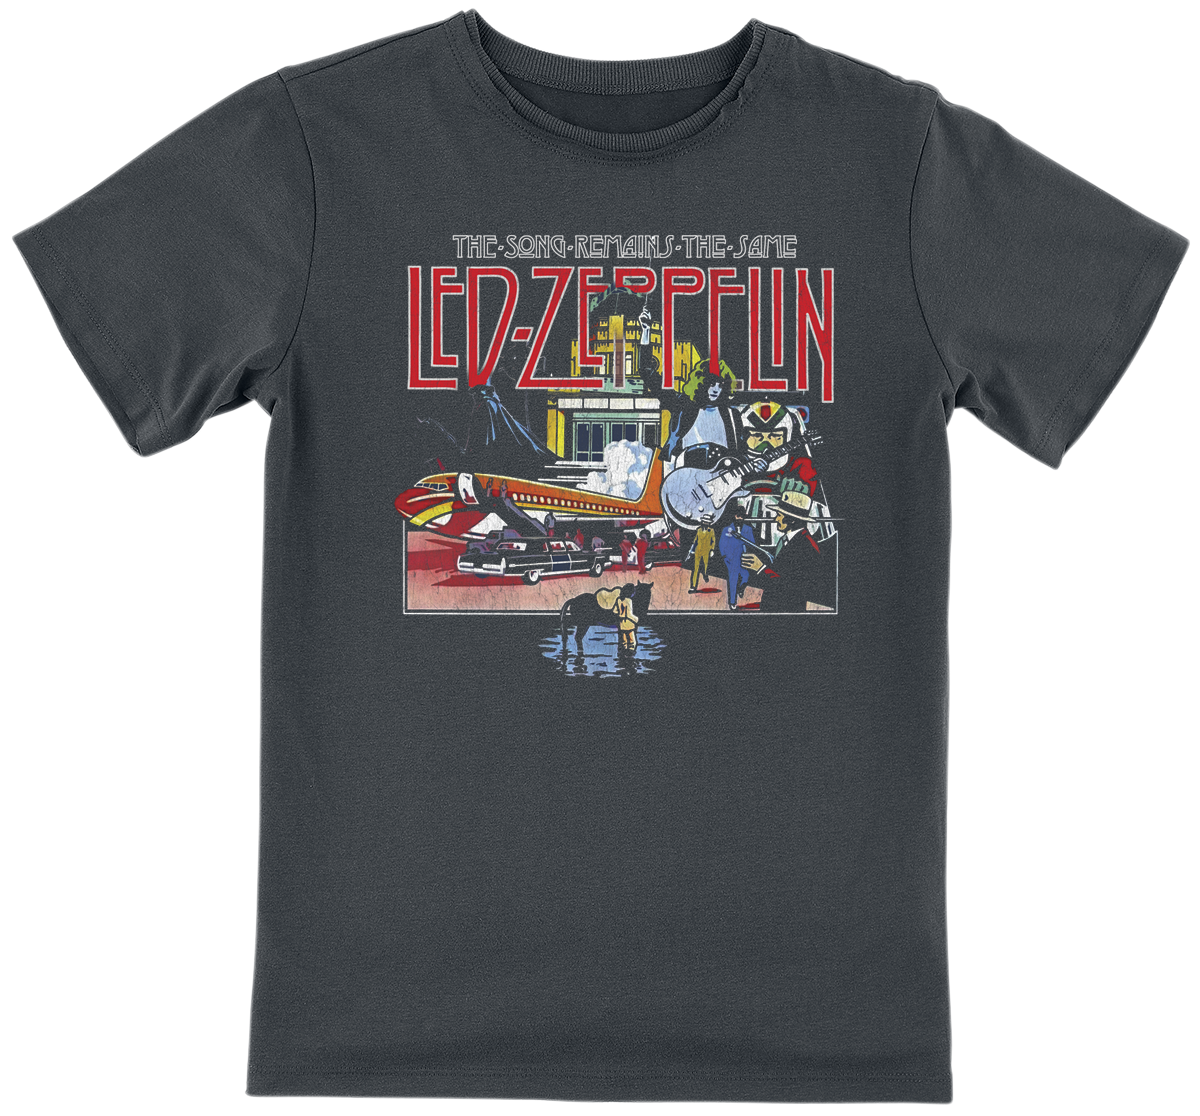 Led Zeppelin - Amplified Collection - The Song Remains The Same Tour - T-Shirt - charcoal